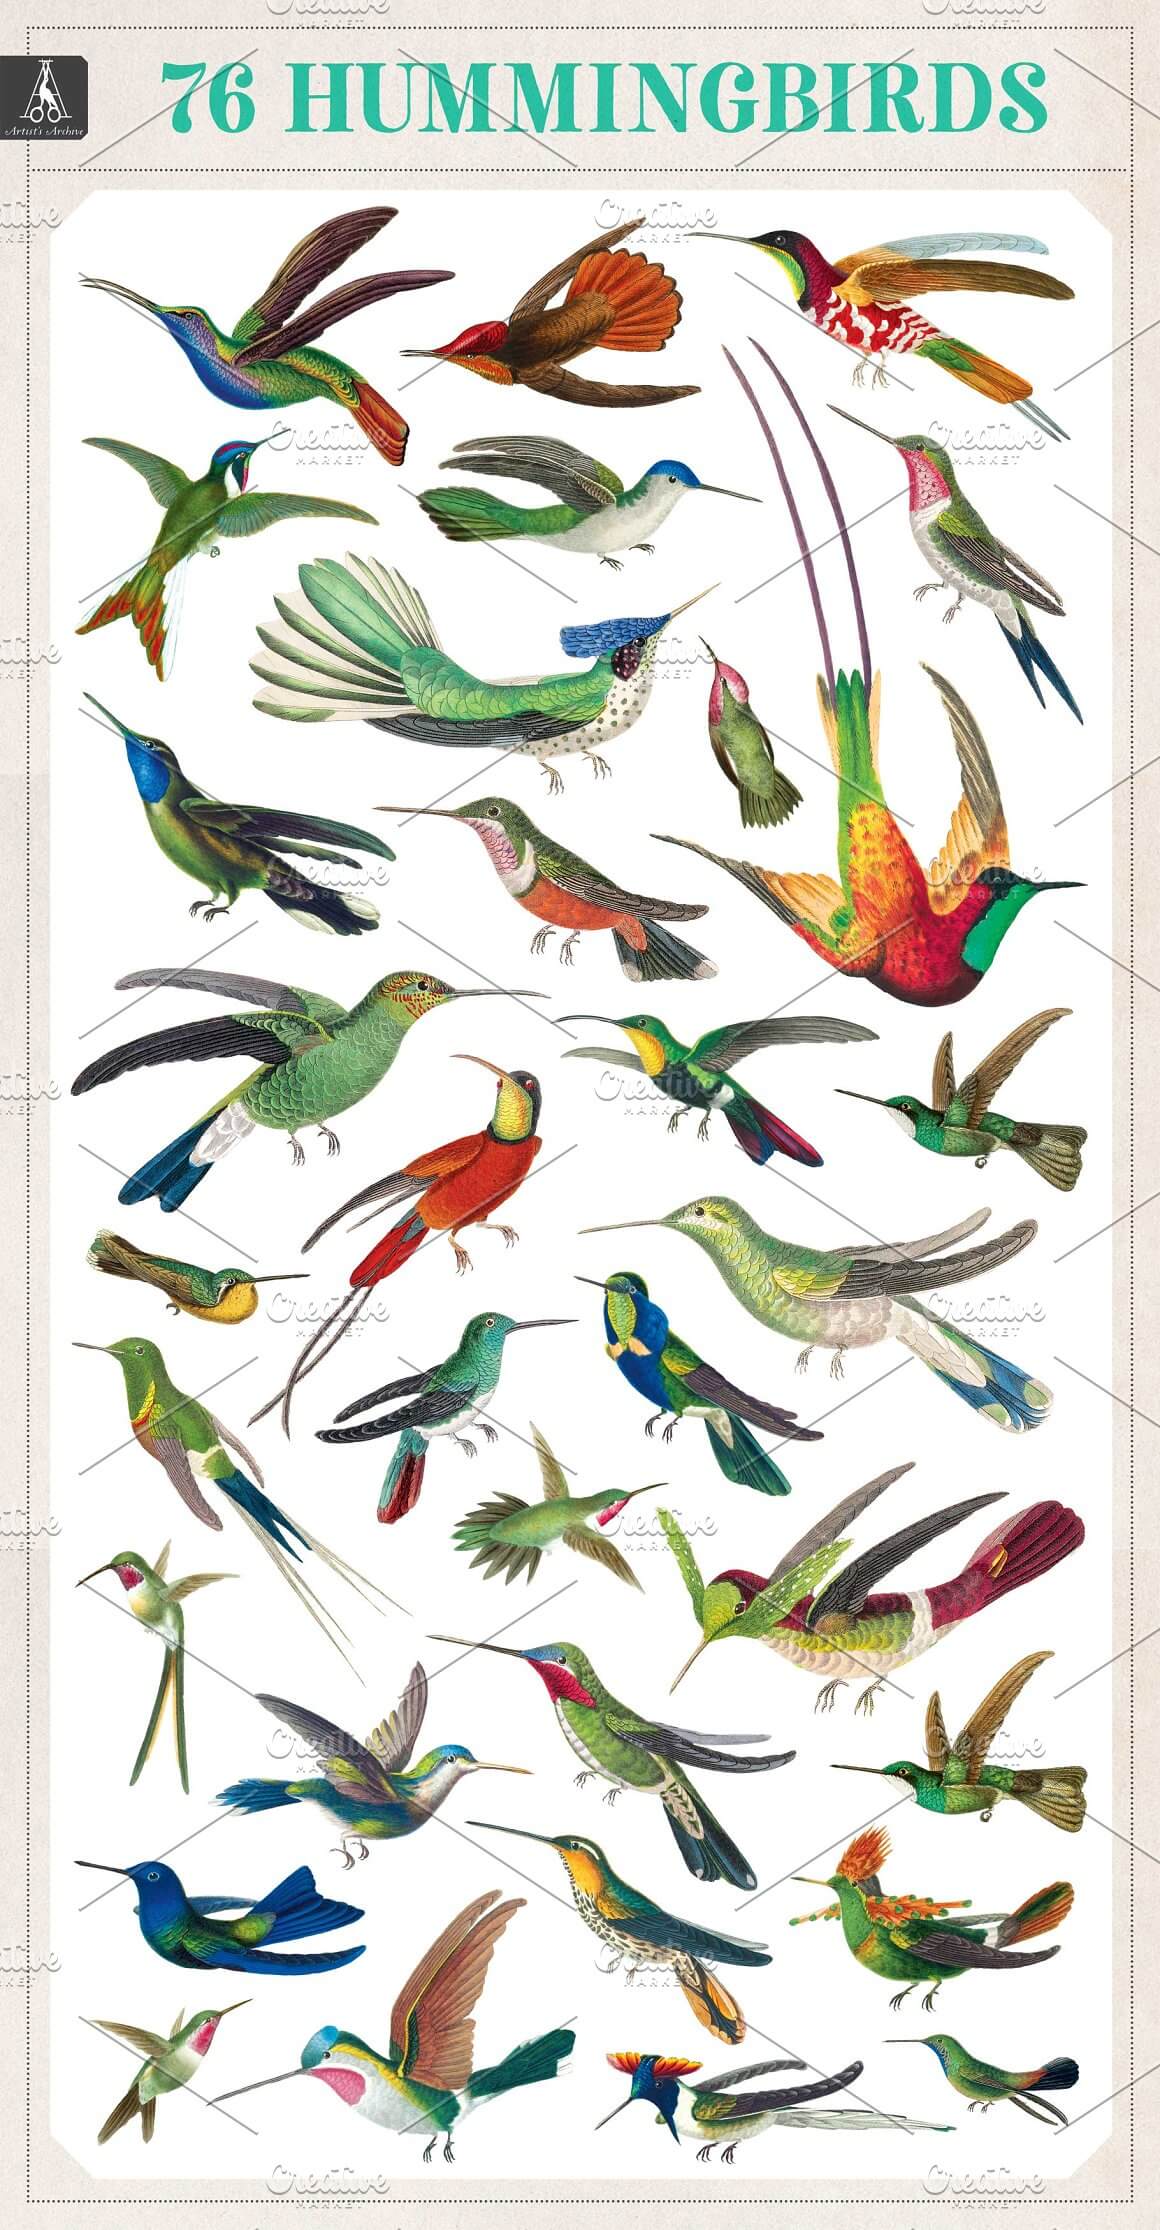 Seventy-six images of a Hummingbird in a gray frame.